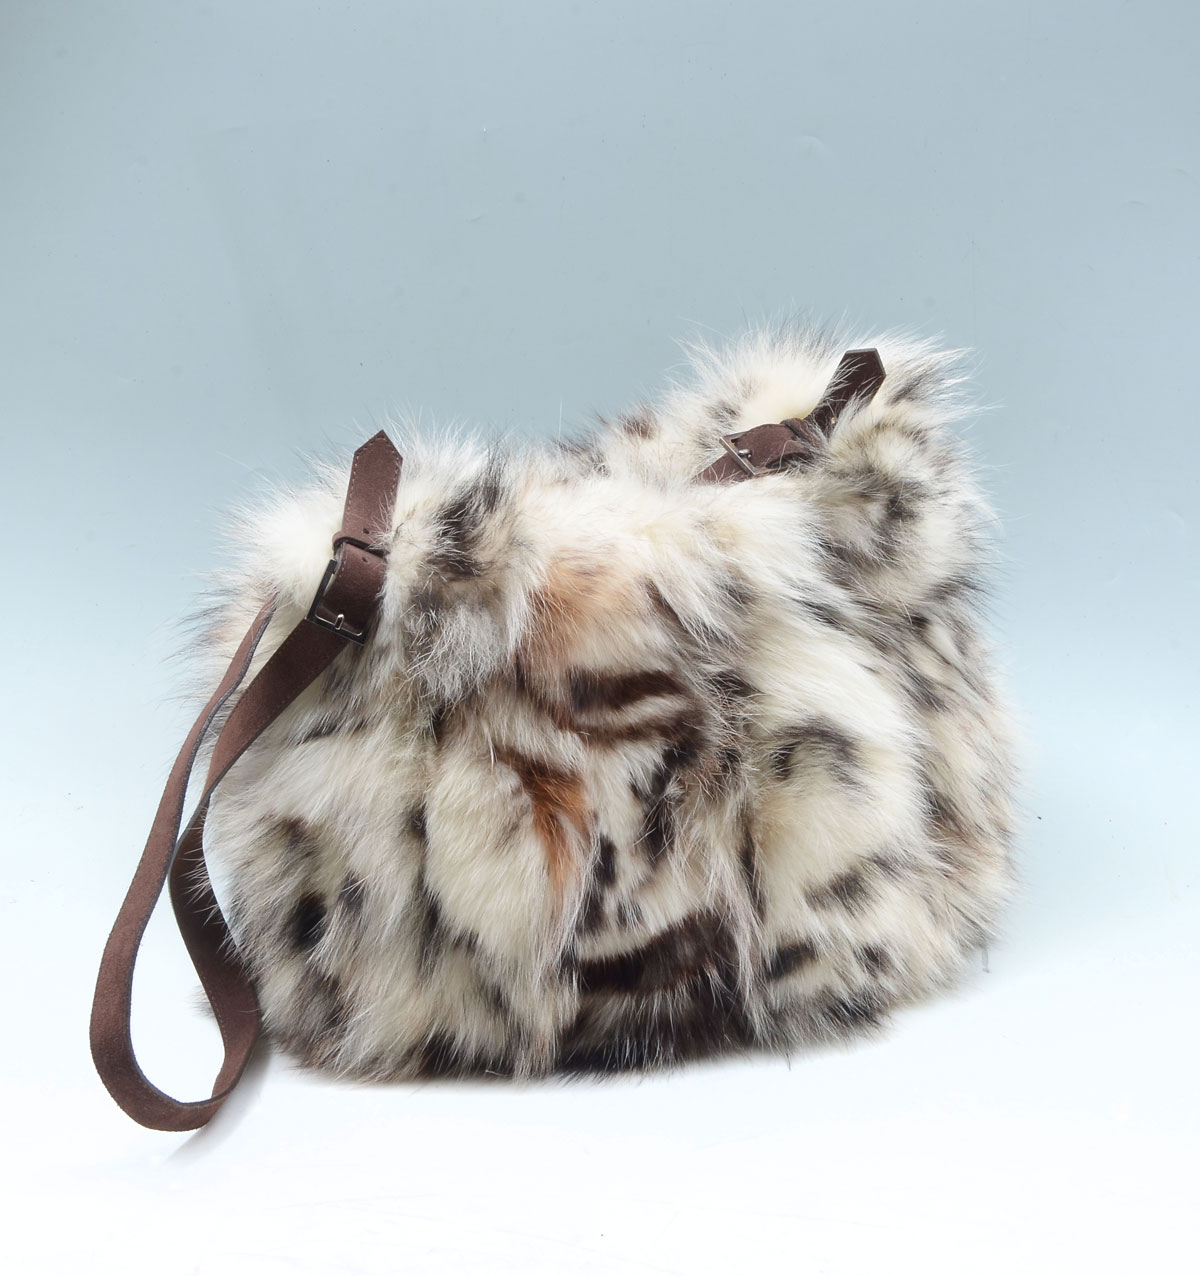 SPOTTED LYNX FUR PURSE: Spotted lynx